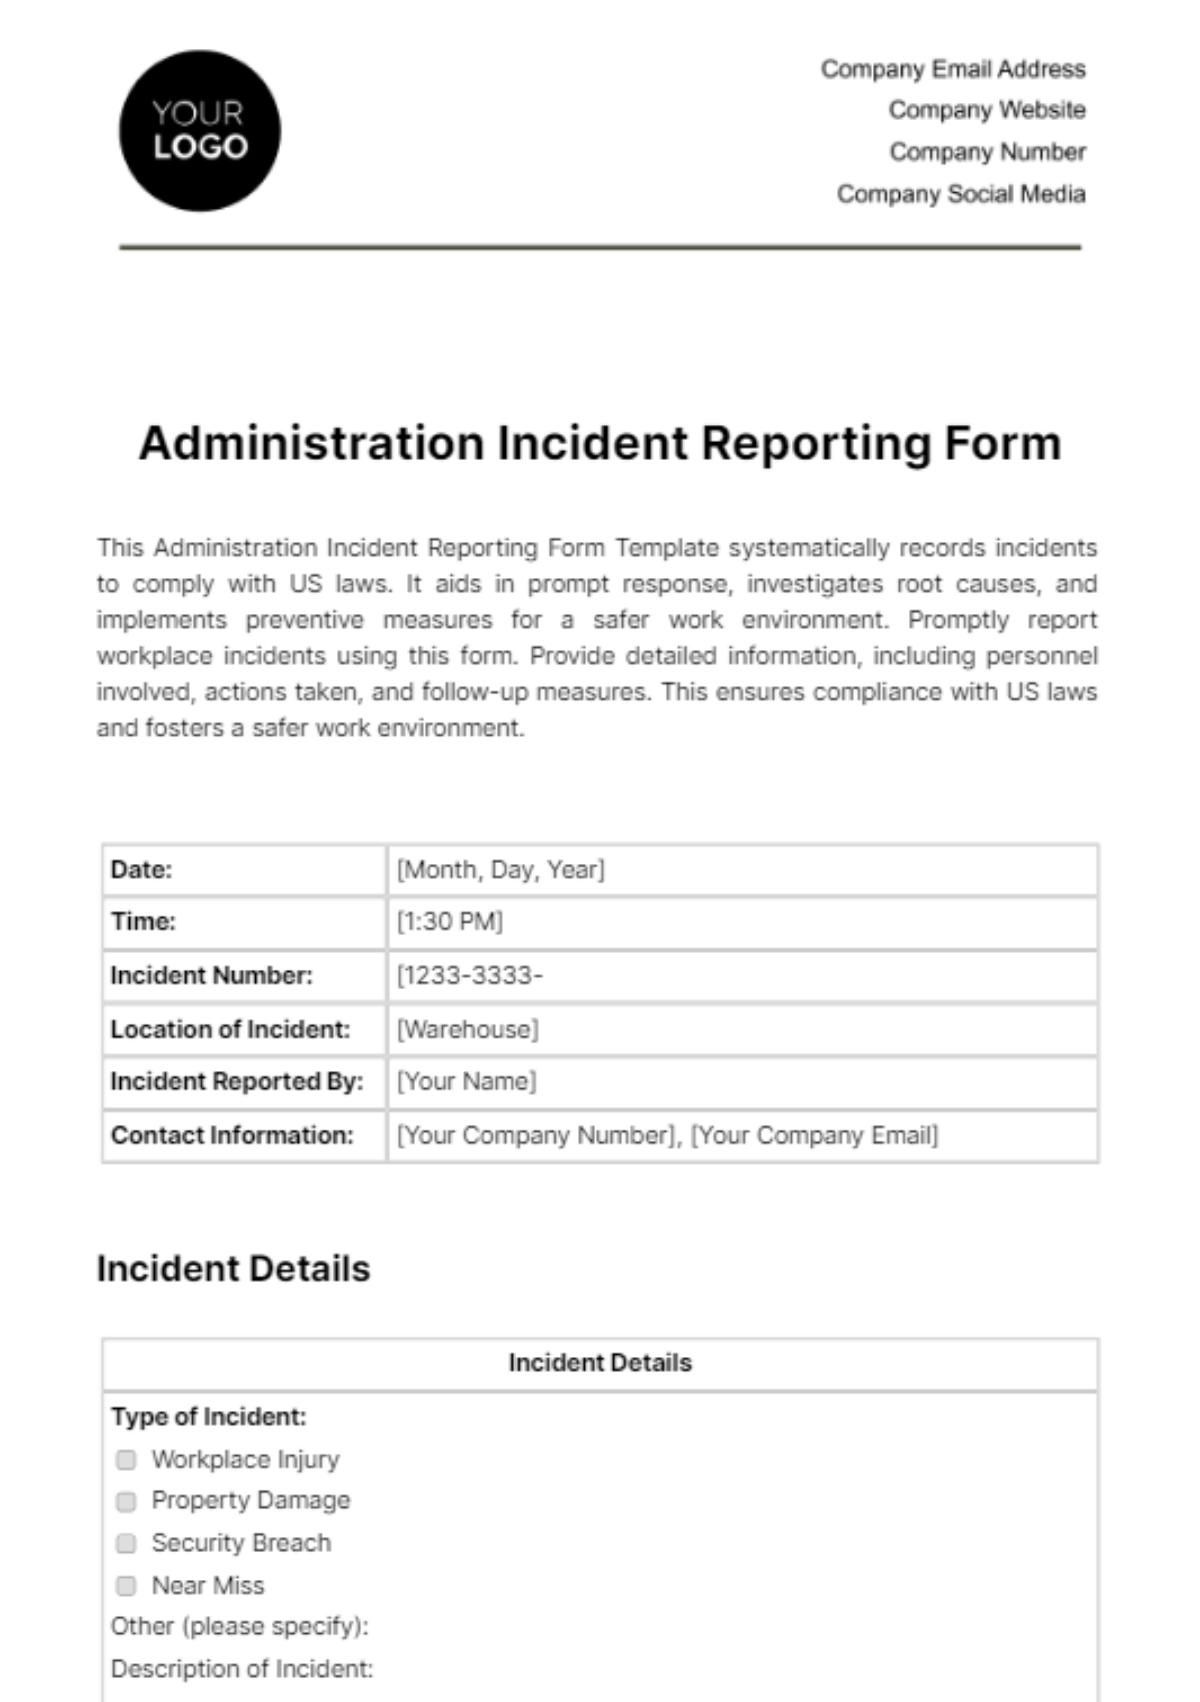 Administration Incident Reporting Form Template